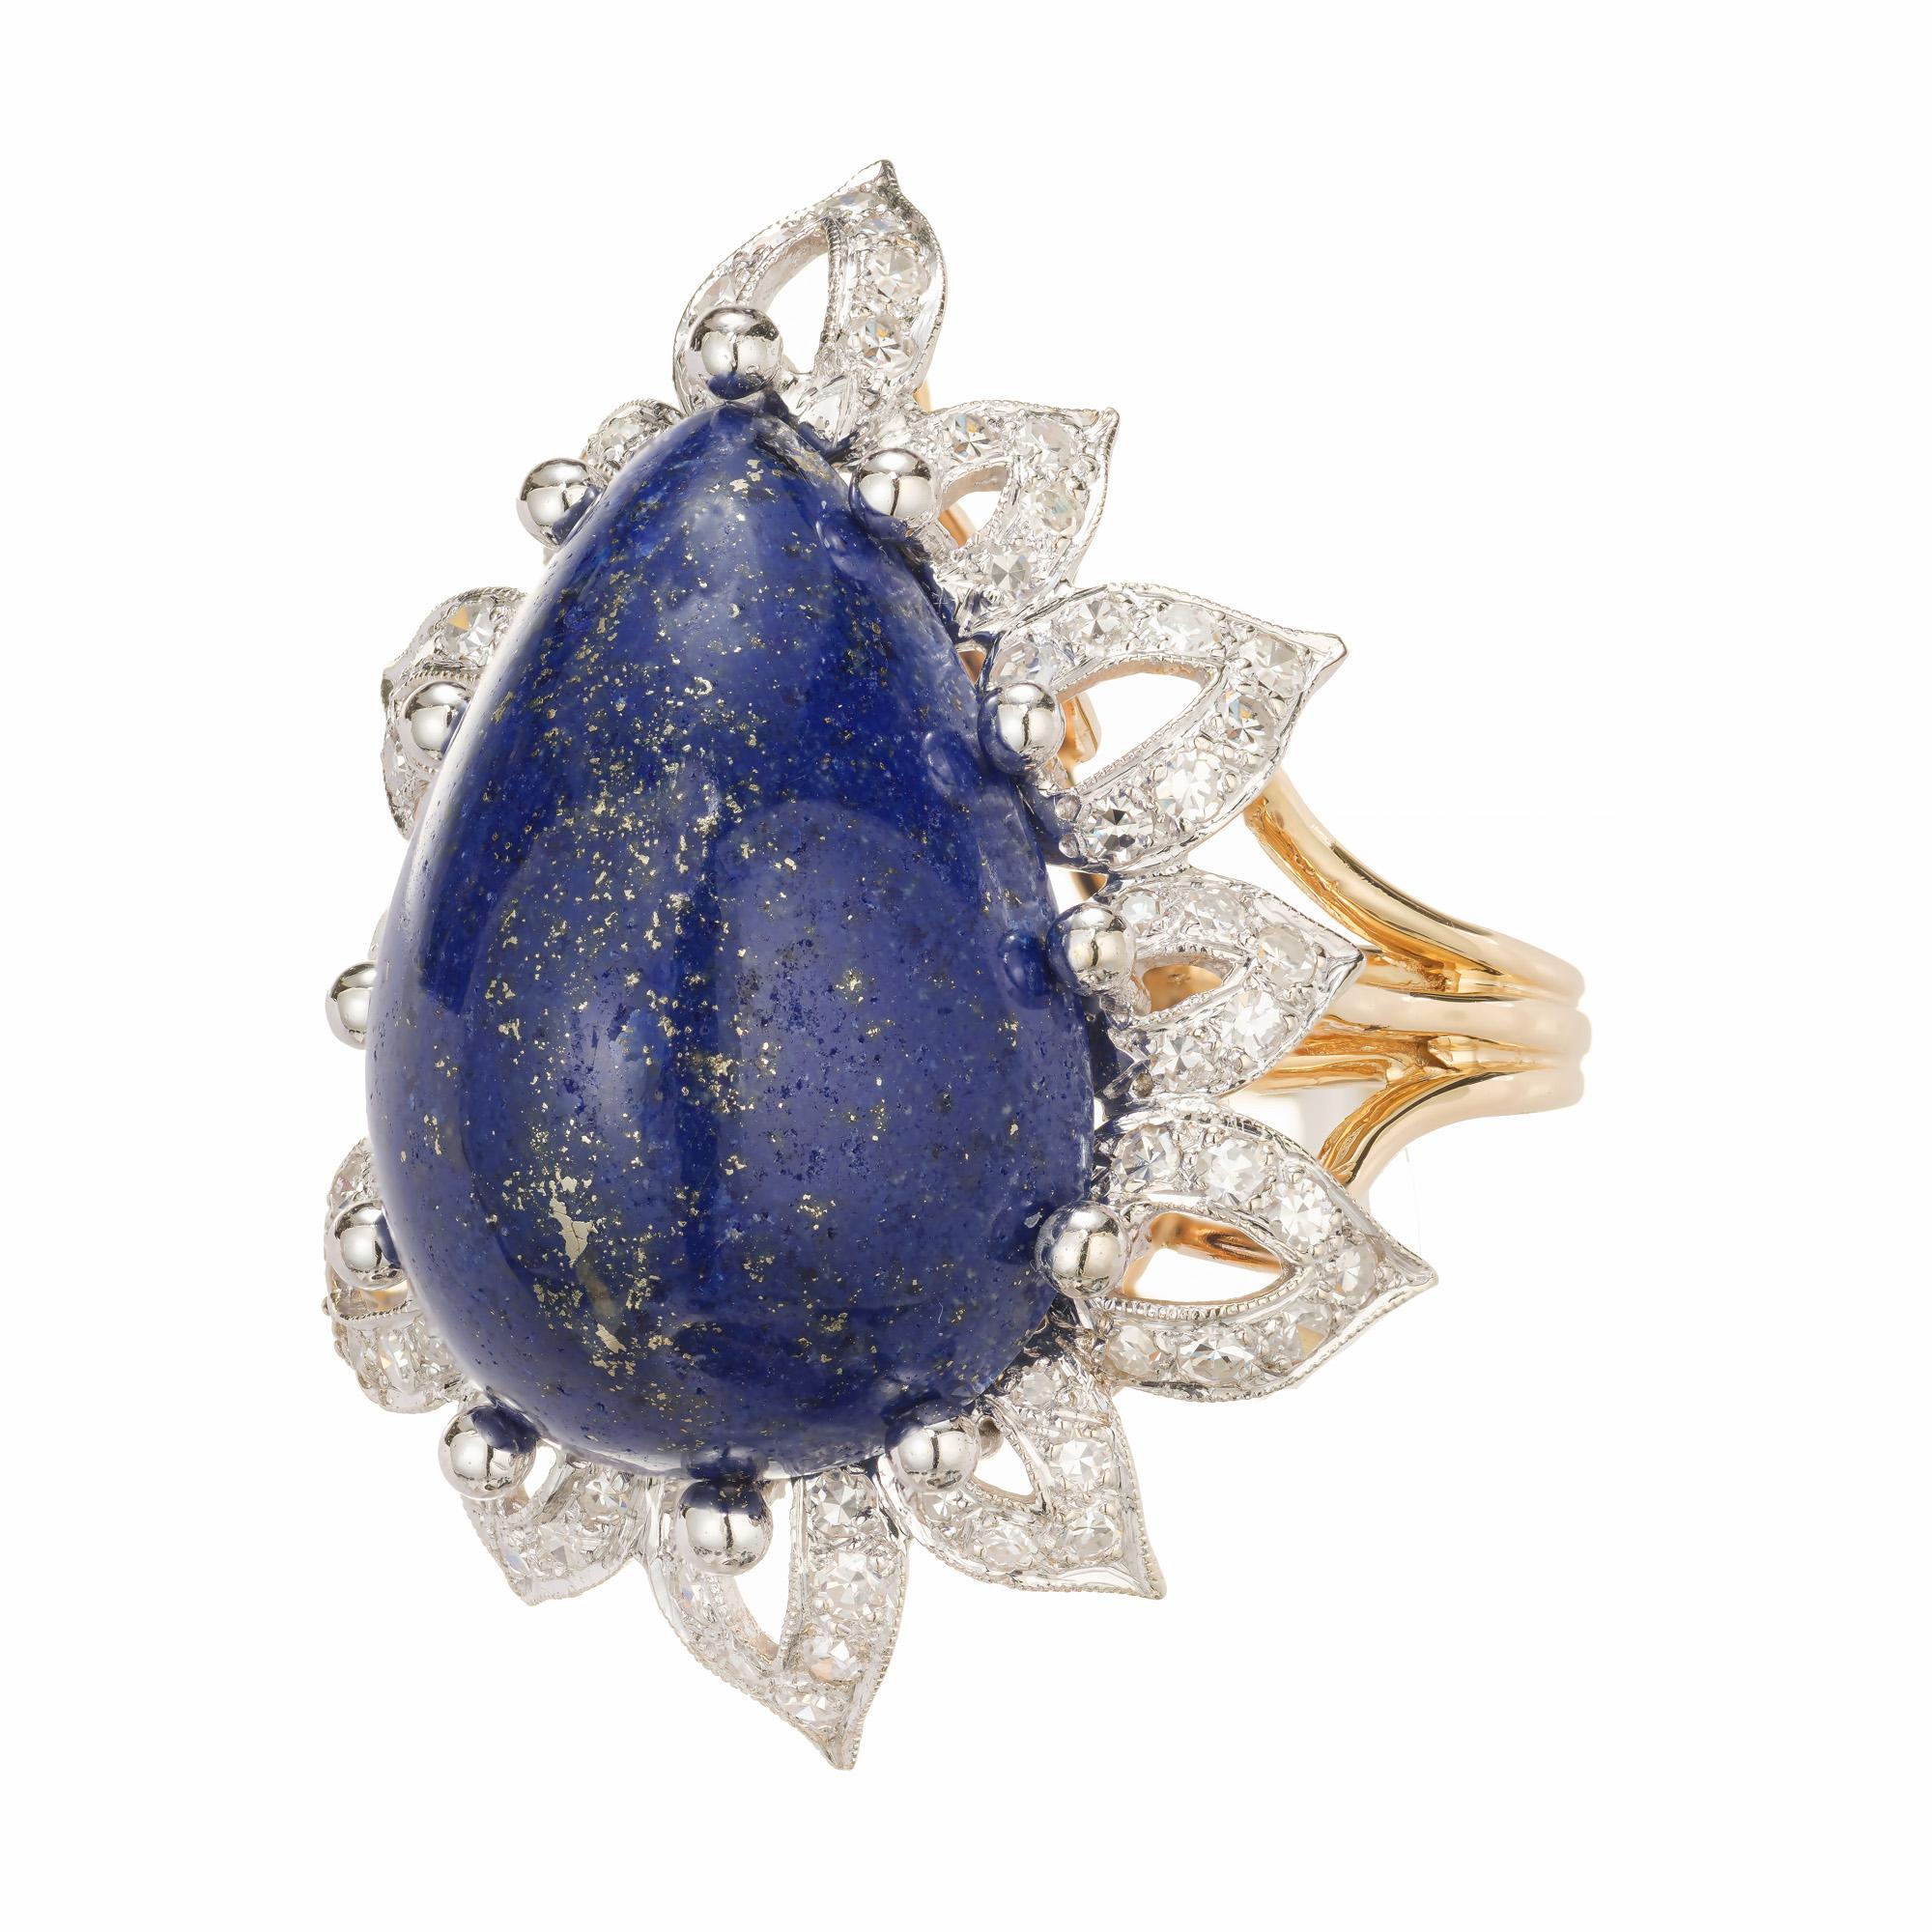 Bright blue natural 30.00 carat untreated lapis lazuli cocktail ring circa 1955-1965 in a flower type design with yellow and white gold  with diamonds

1 pear shape violetish blue cabochon lapis lazulli, approx. 30.00cts GIA Certificate #